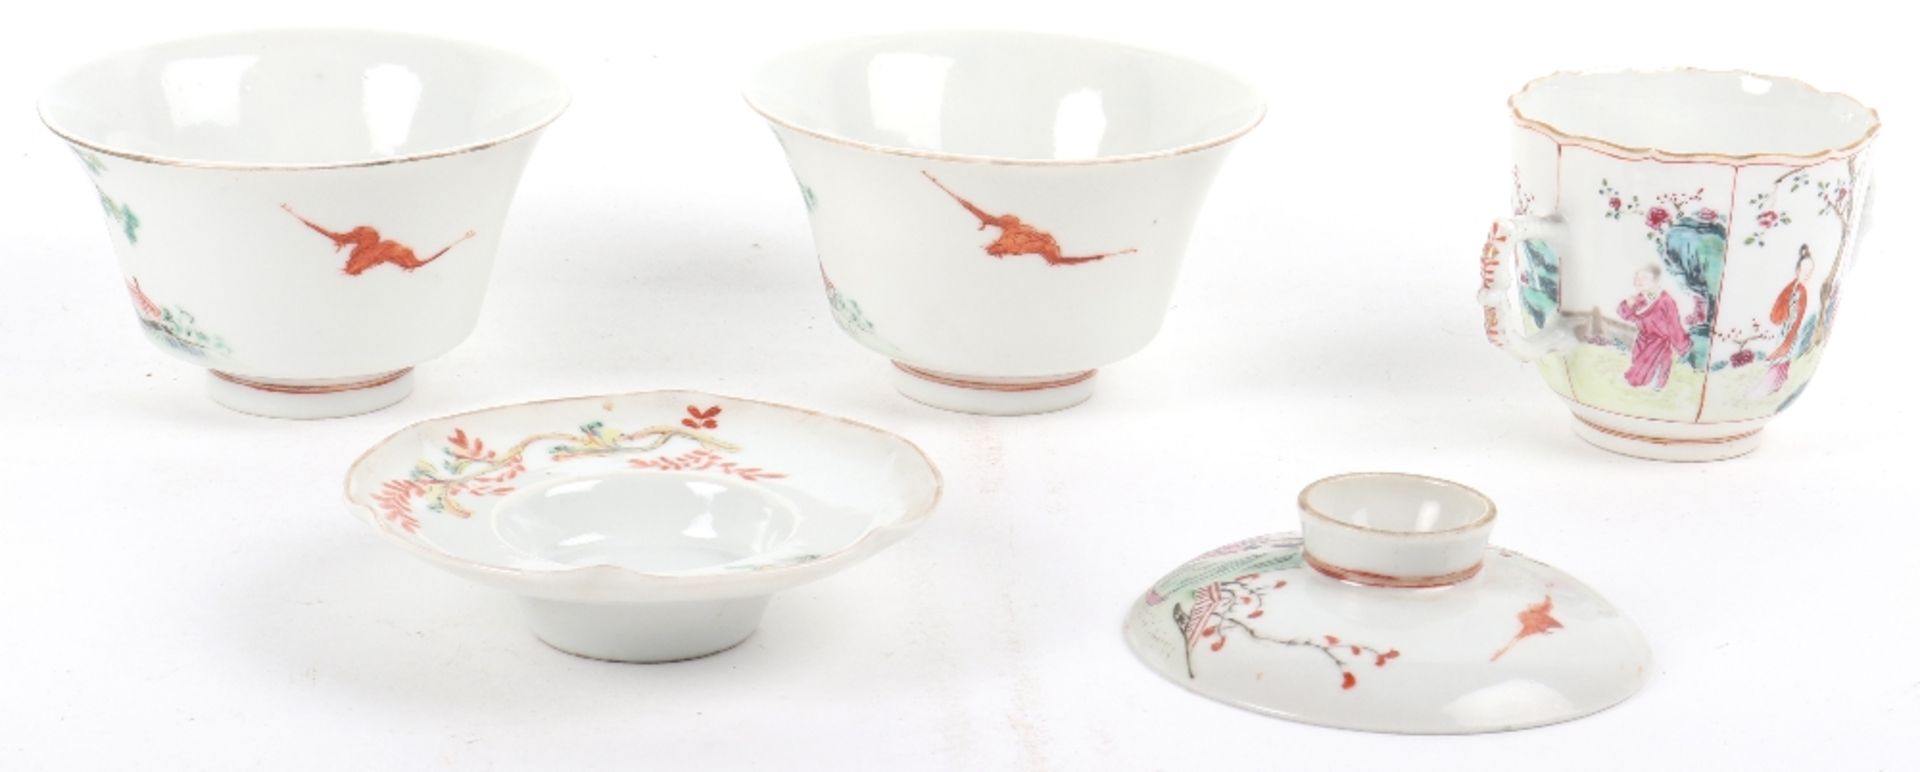 A pair of late 19th century Chinese famille rose porcelain bowls - Image 3 of 12